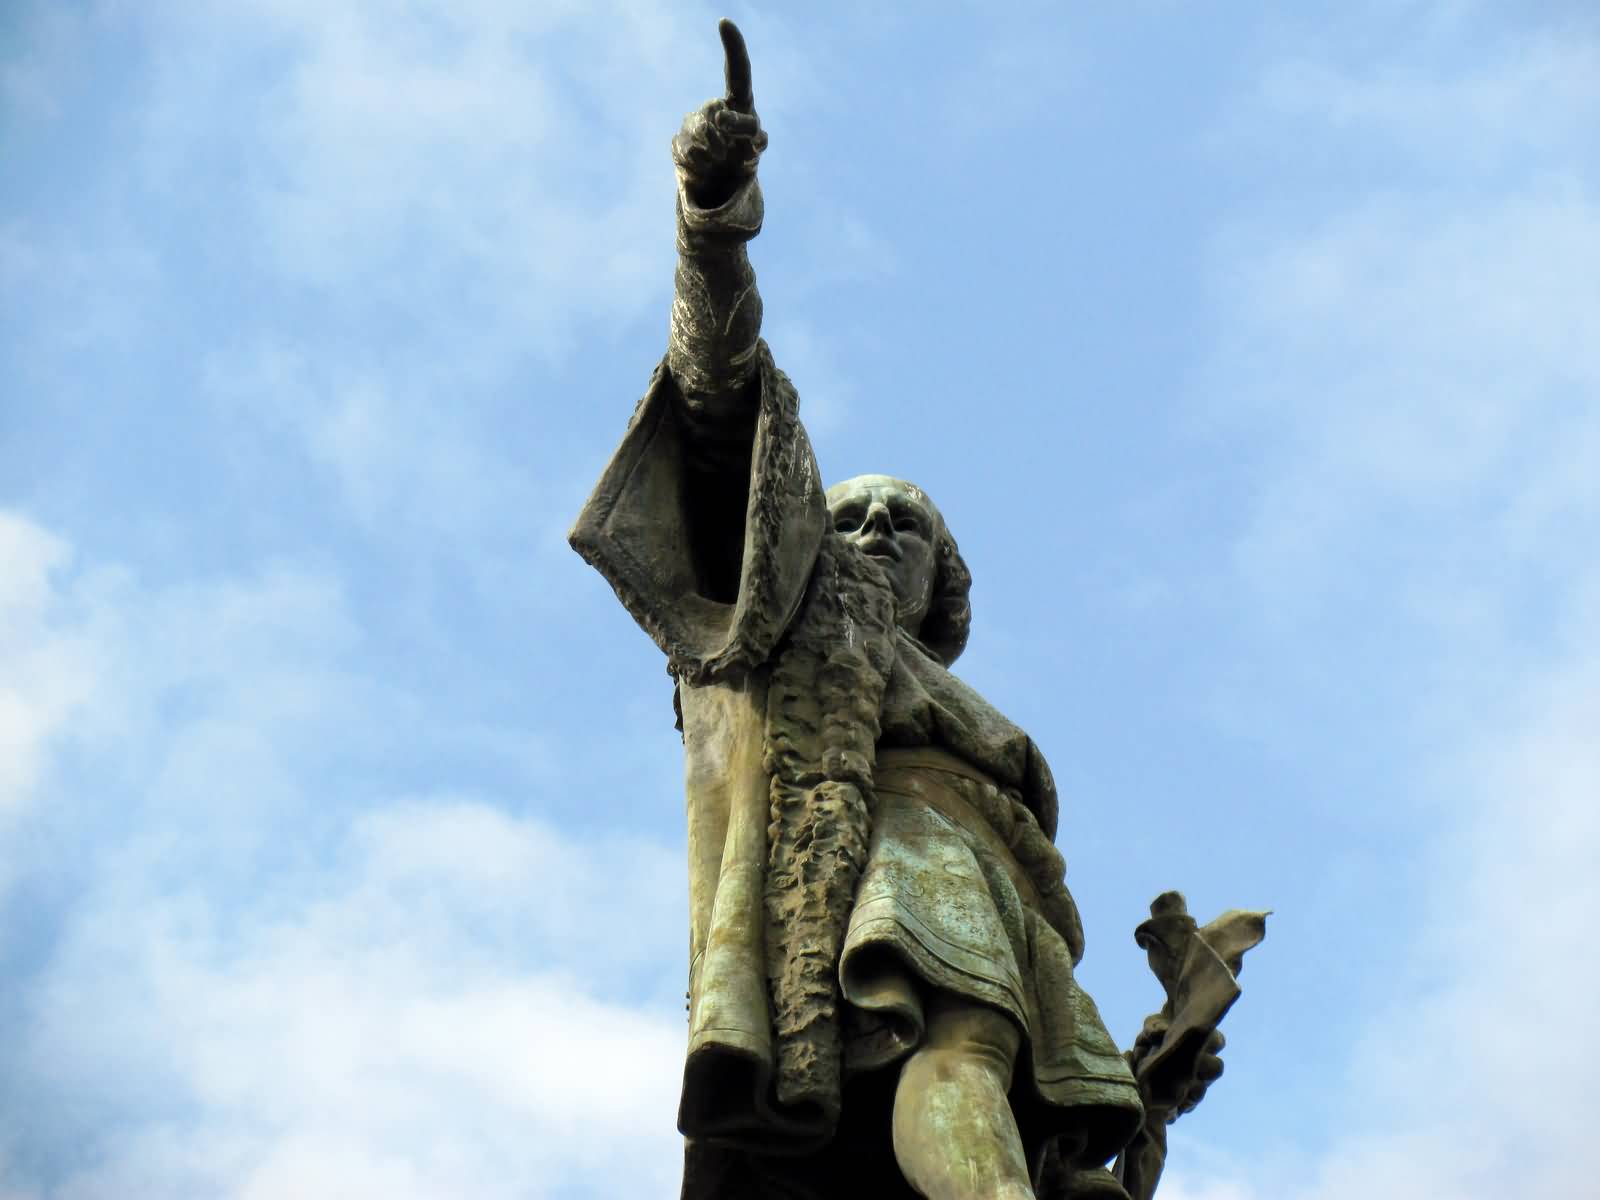 Closeup View Of The Christopher Columbus Statue On The Columbus Monument